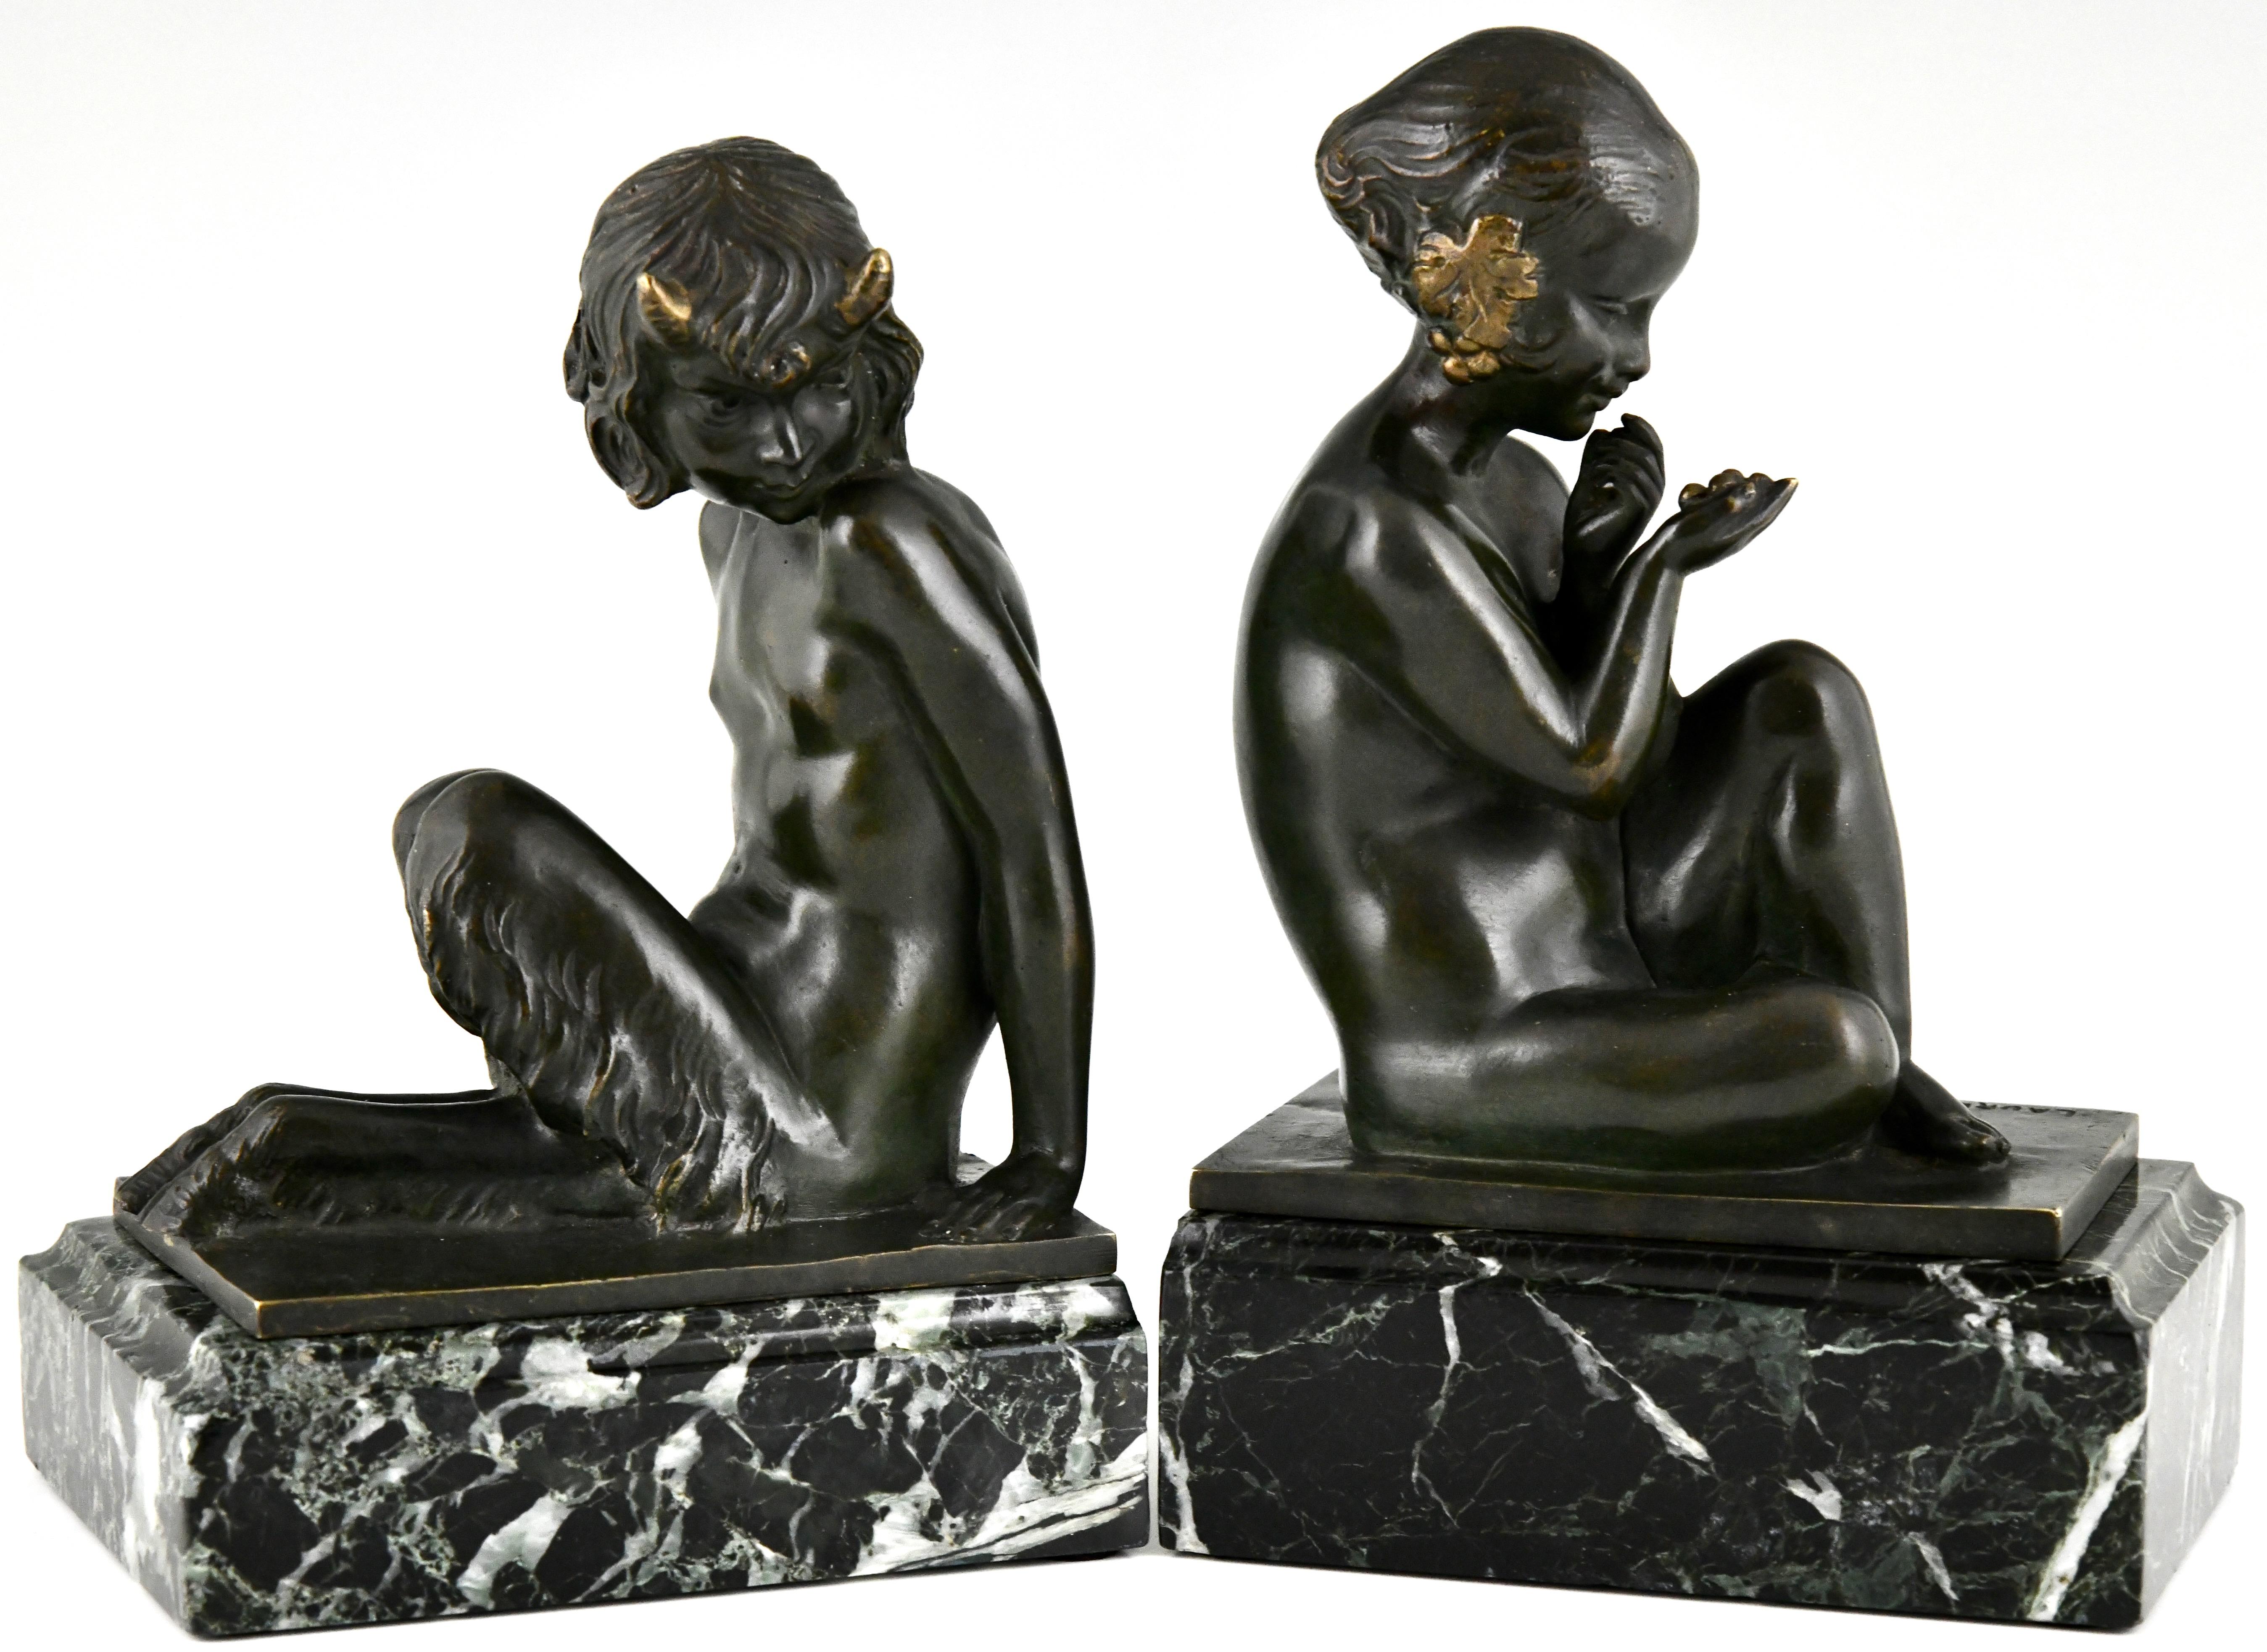 Art Deco bronze bookends faun and girl with grapes by Pierre Laurel. 
Pseudonym of Pierre Le Faguays. 
Signed Laurel & stamped number. 
Patinated bronze on a green marble base. 
France 1925. 
These bookends are illustrated in:
Art Deco and other